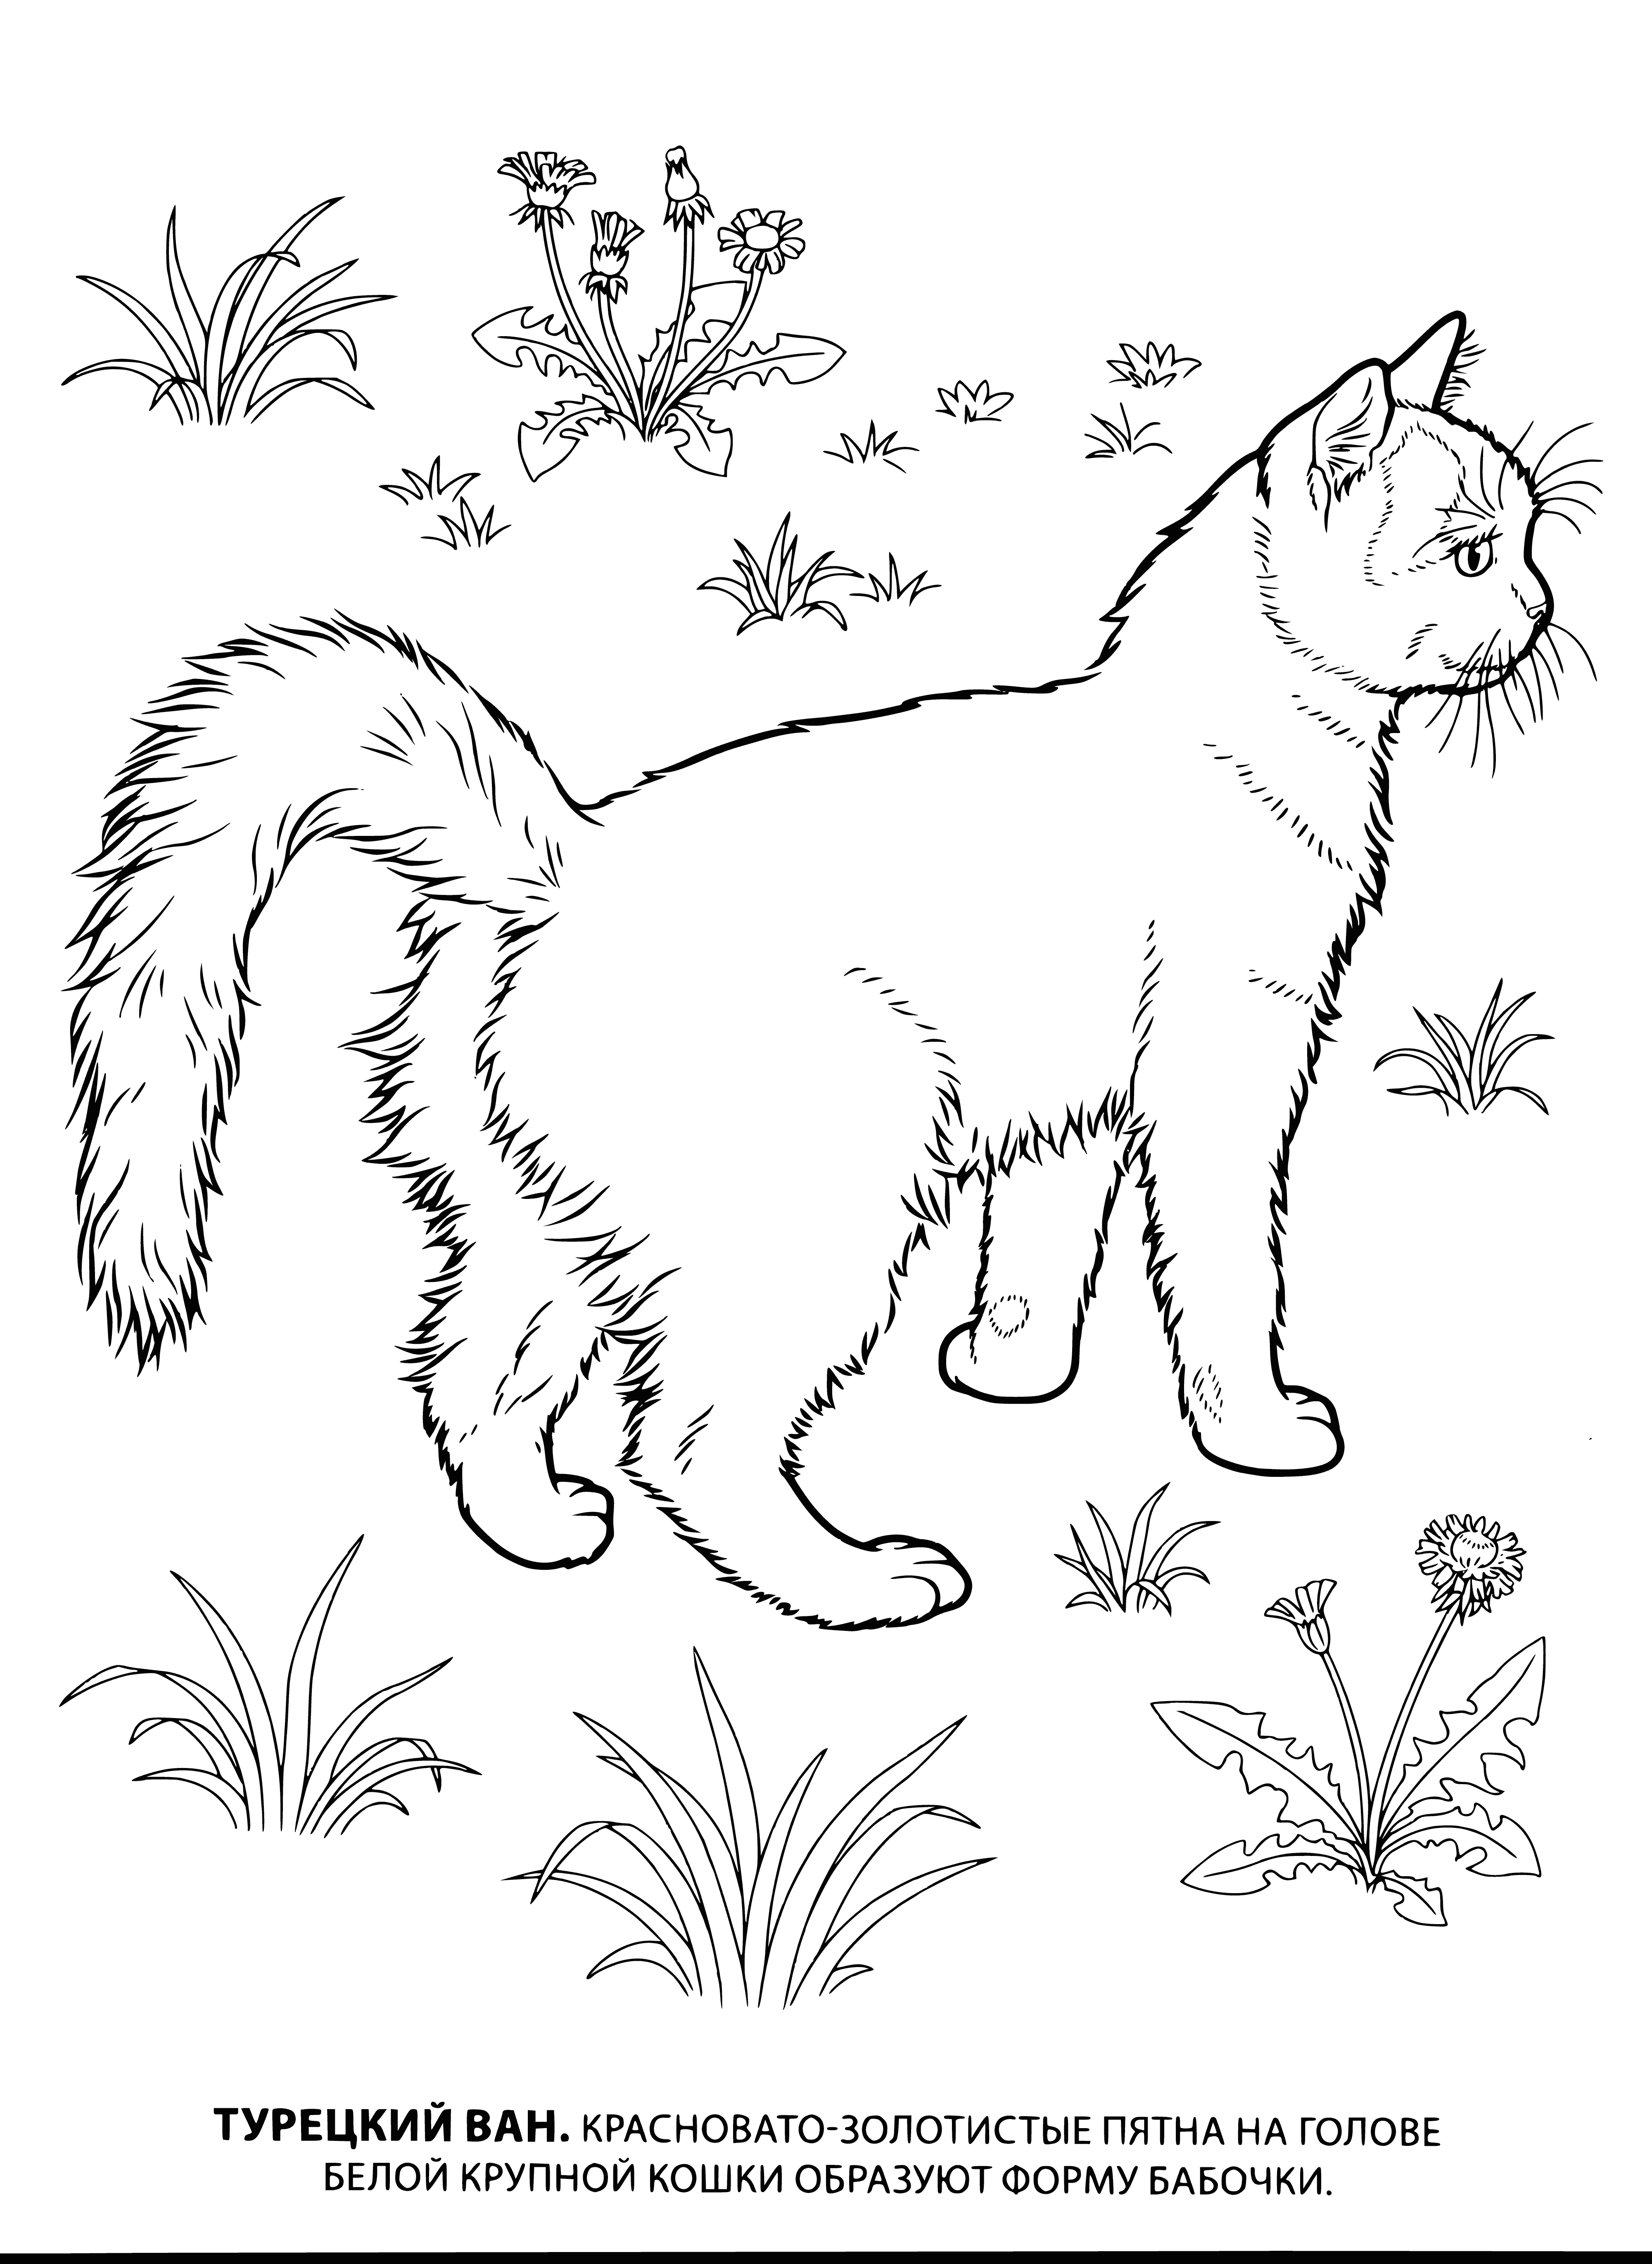 coloring page: 3 cats coloring page: white w/ black spots, orange & black laying and white sitting. All have long, fluffy tails.